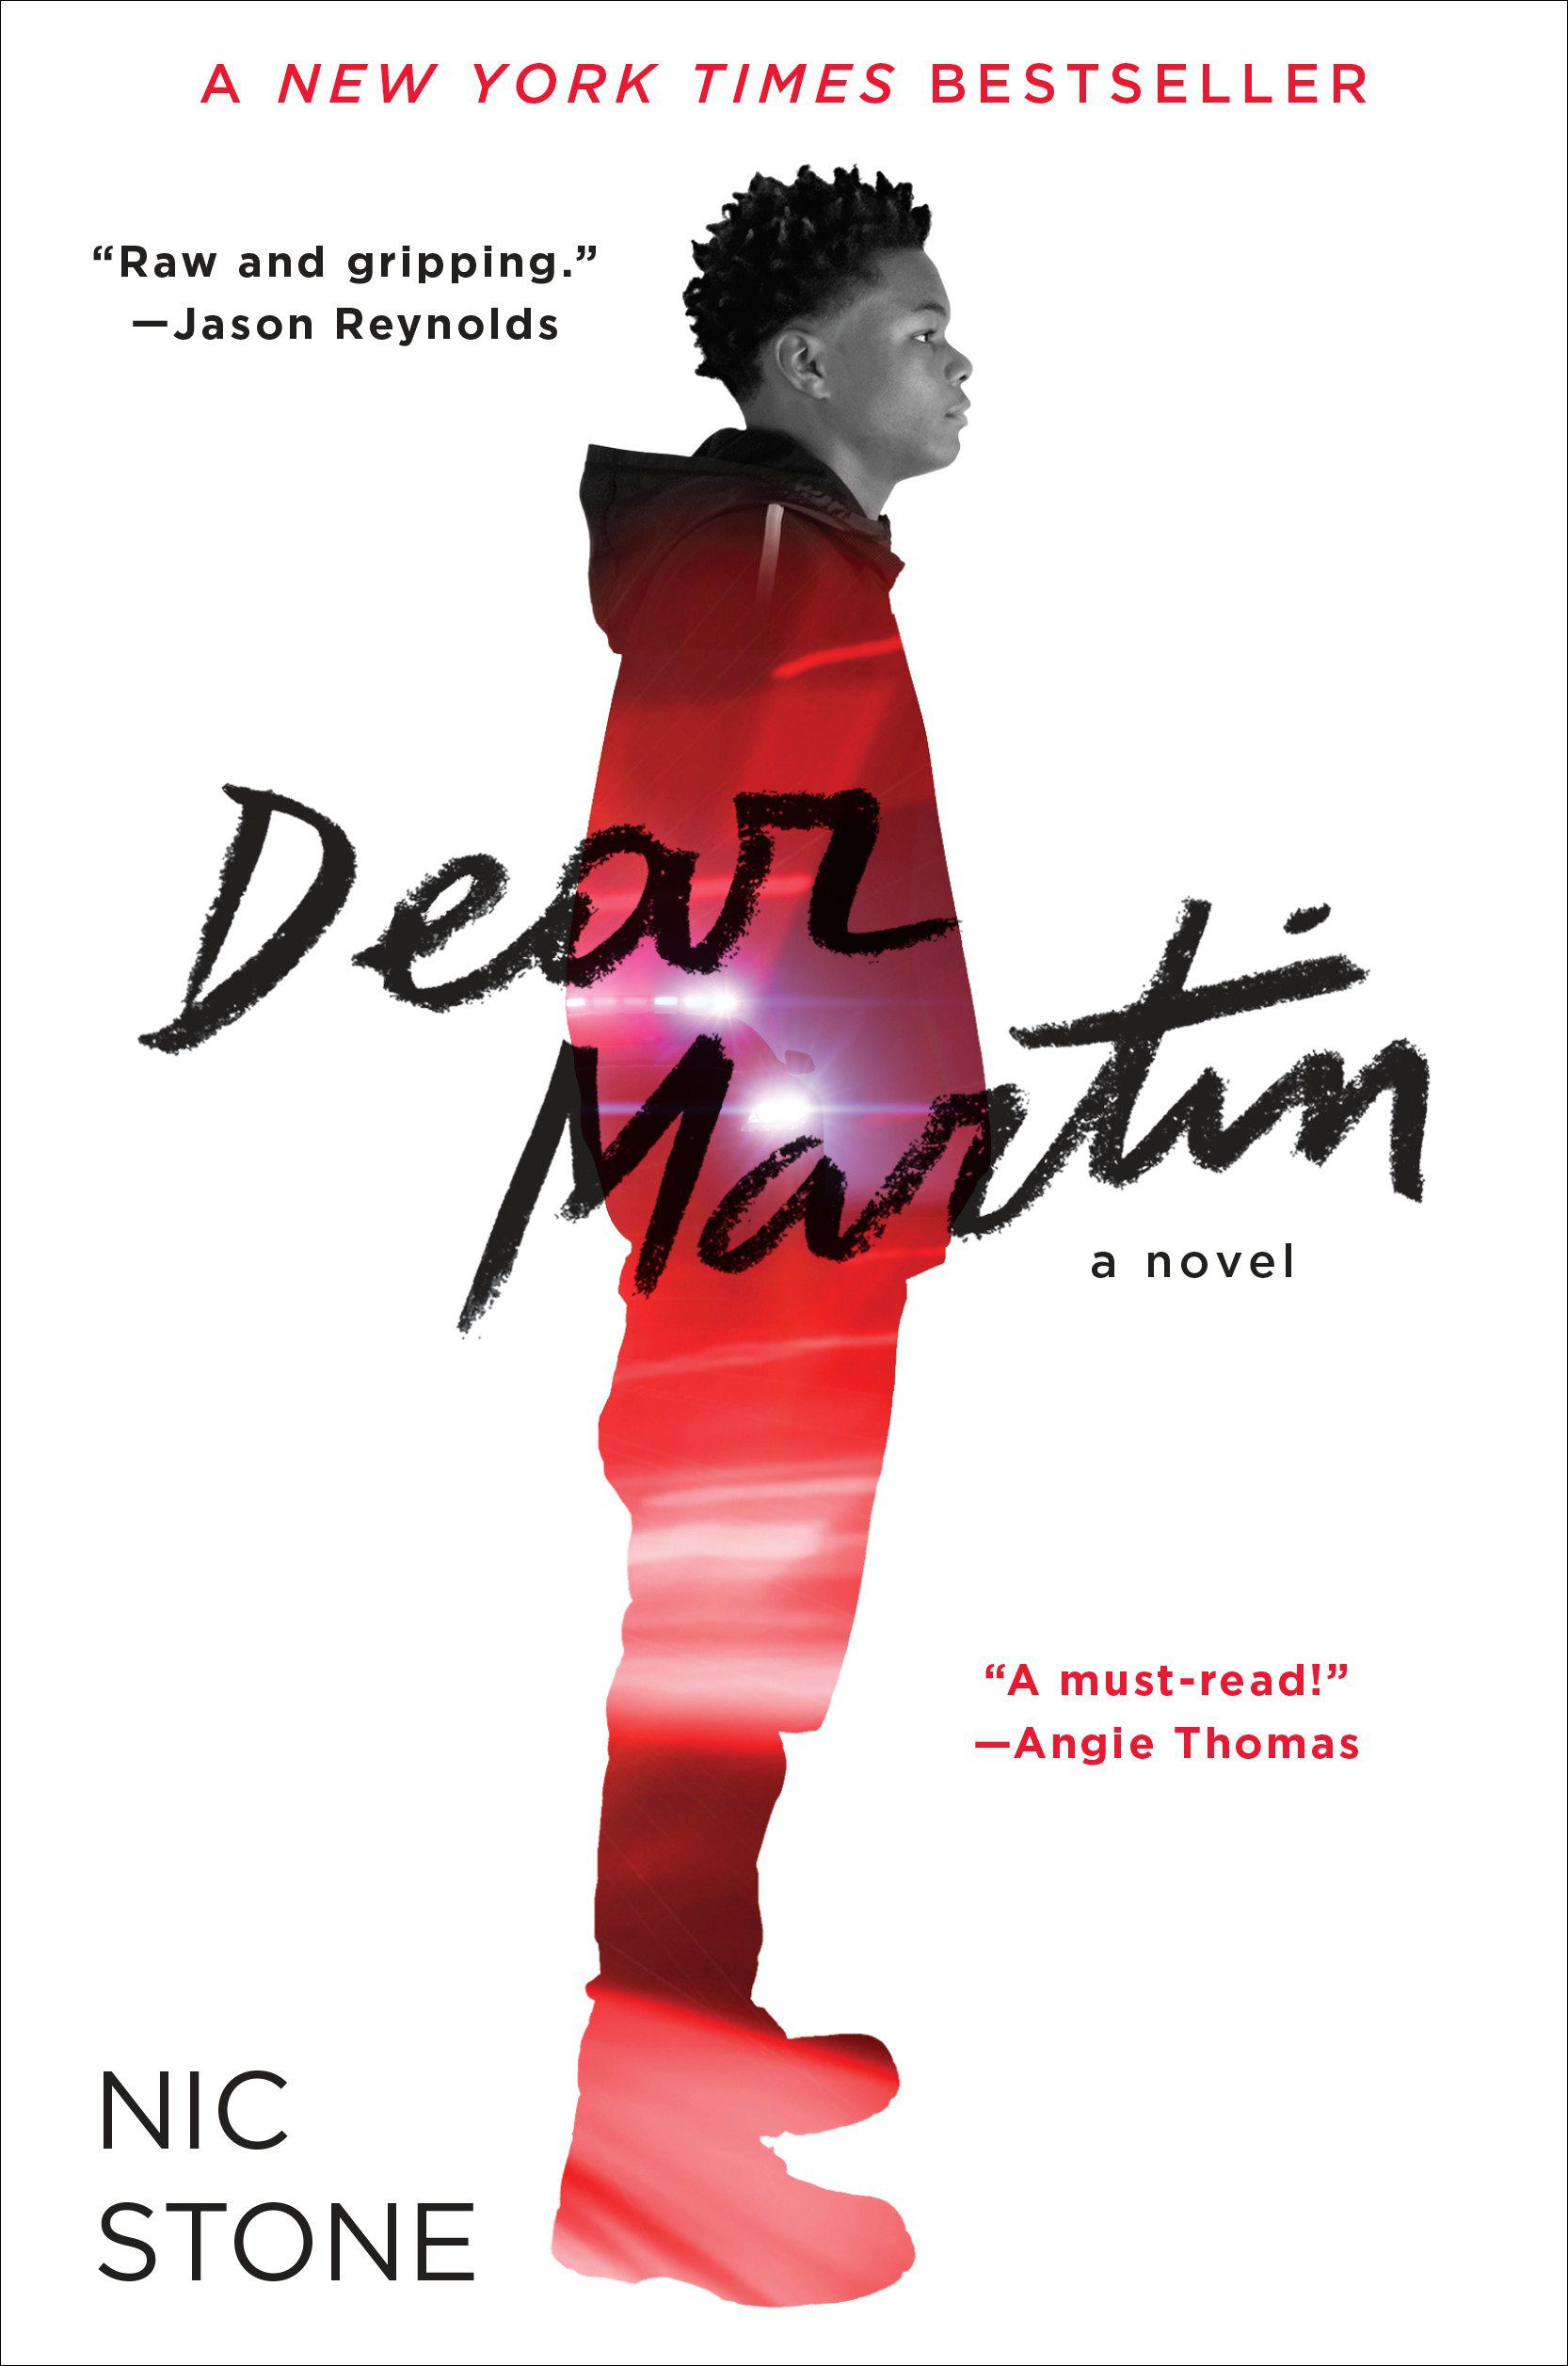 book review on dear martin